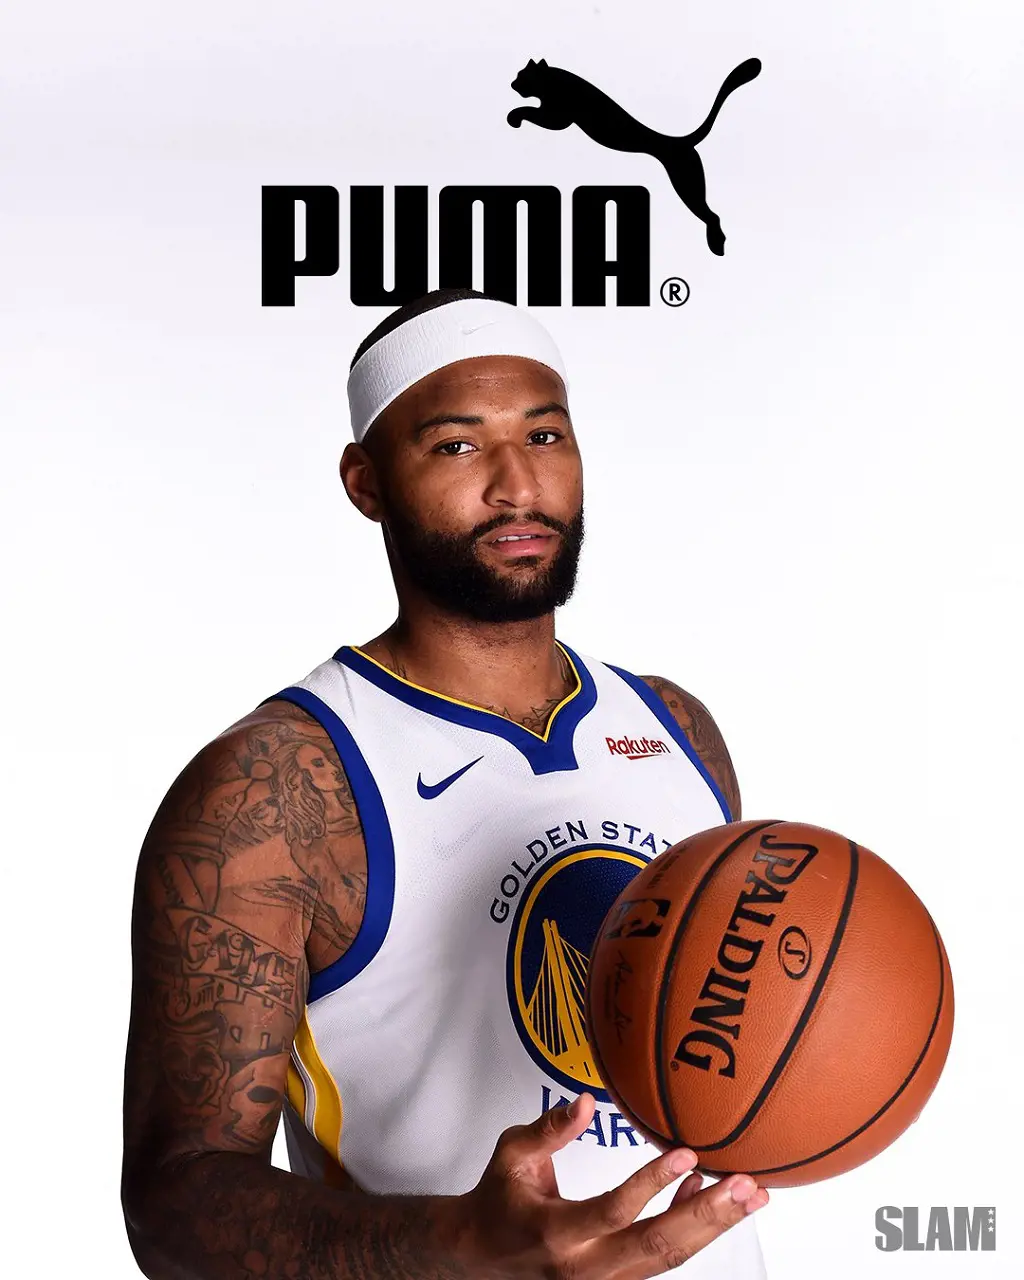 Cousins signed a lucrative deal with Puma after their relaunch of basketball shoes.